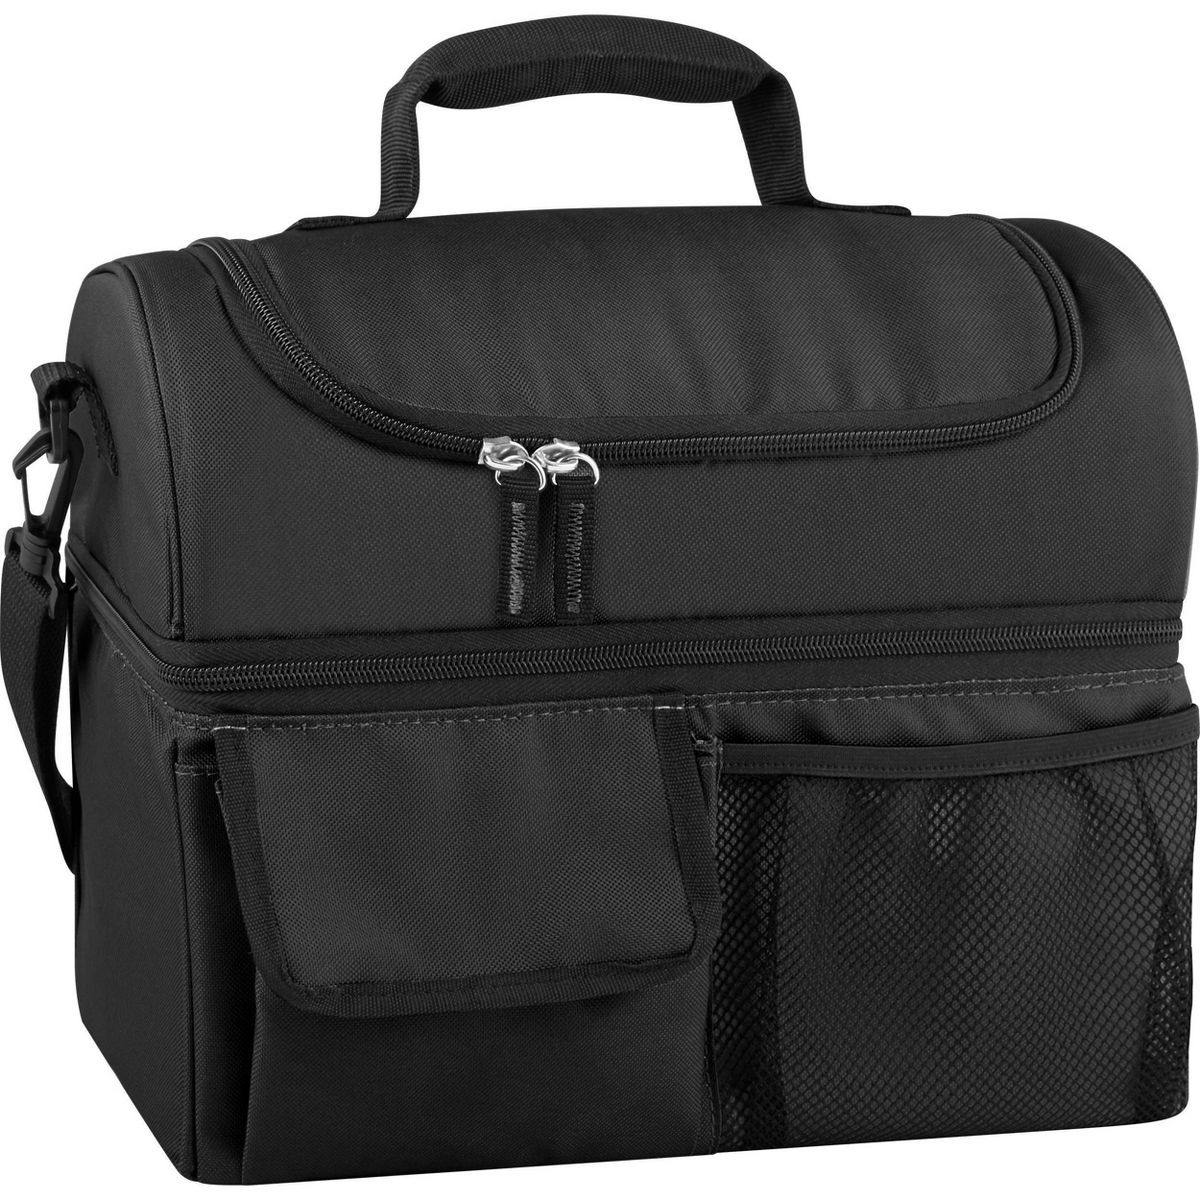 Thermos Lunch Bag – Black | Target